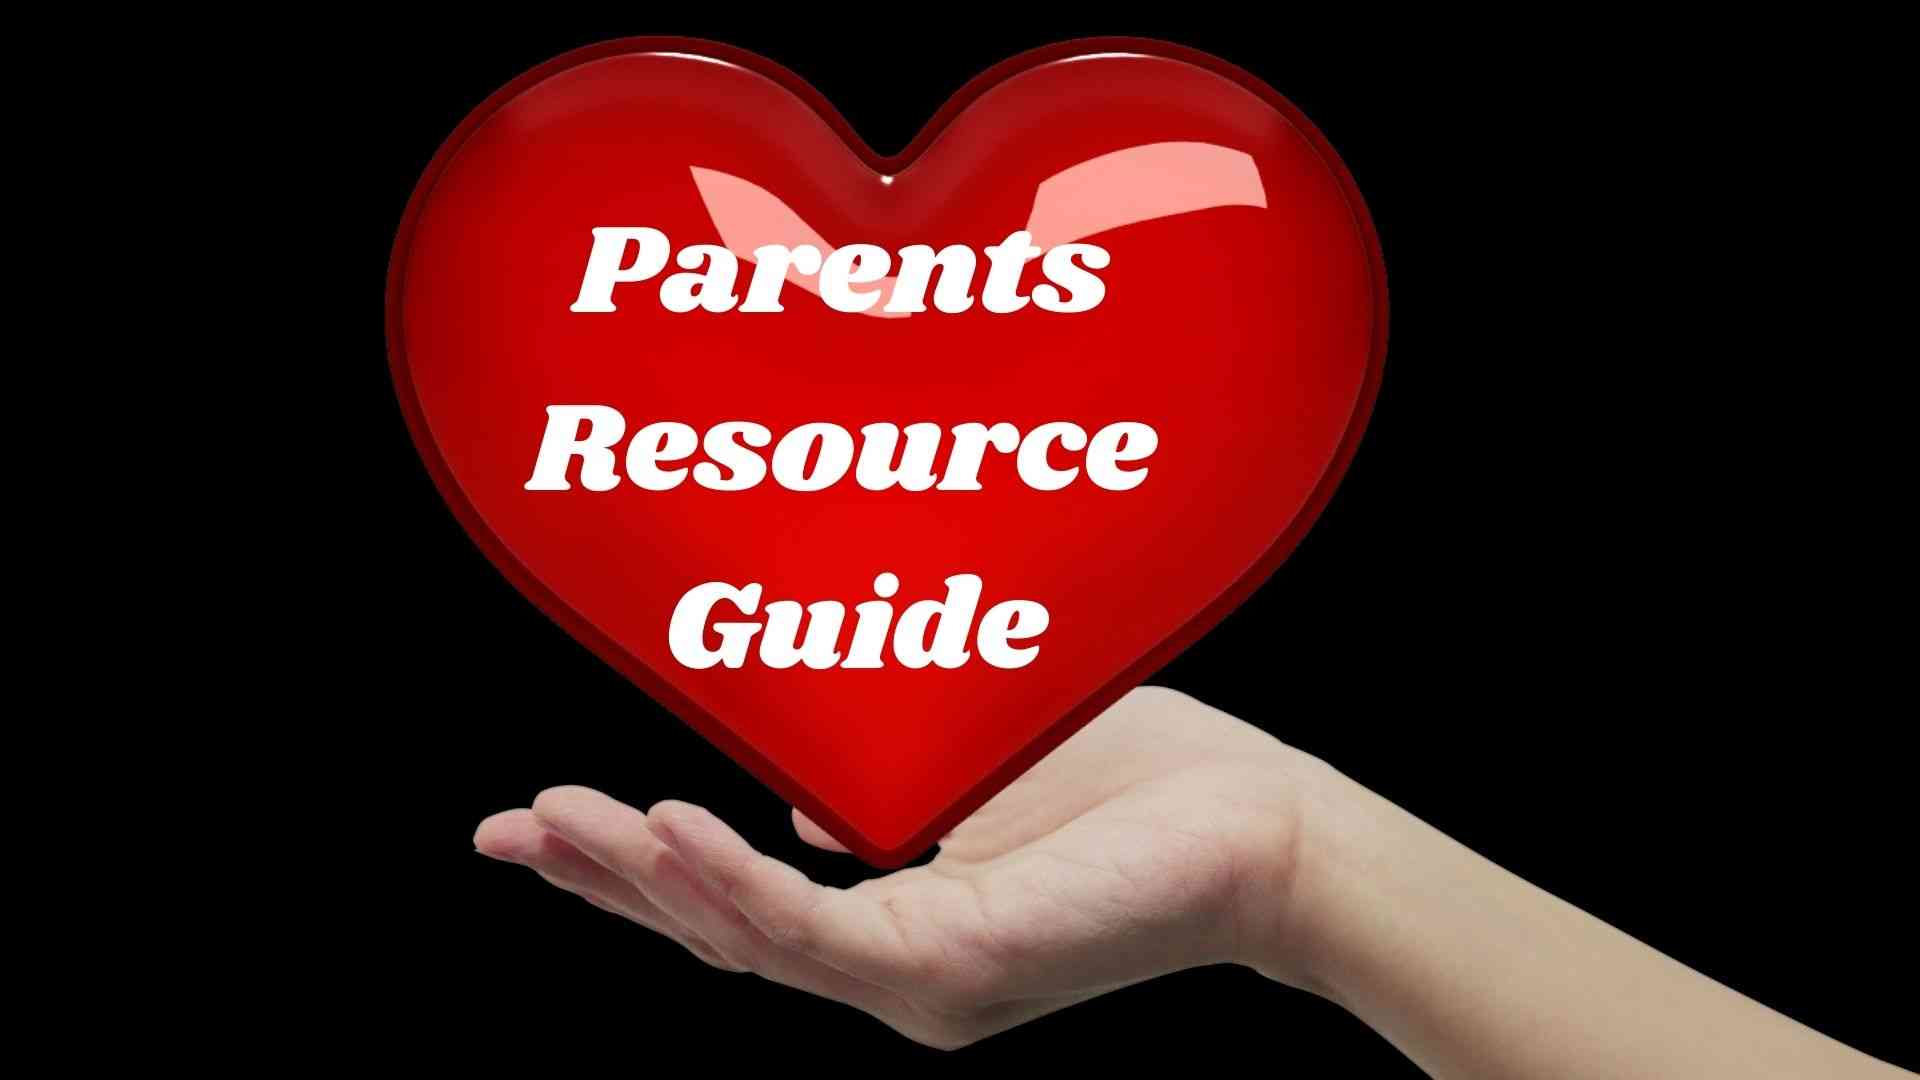 Parents Resource Guide wallpaper and images